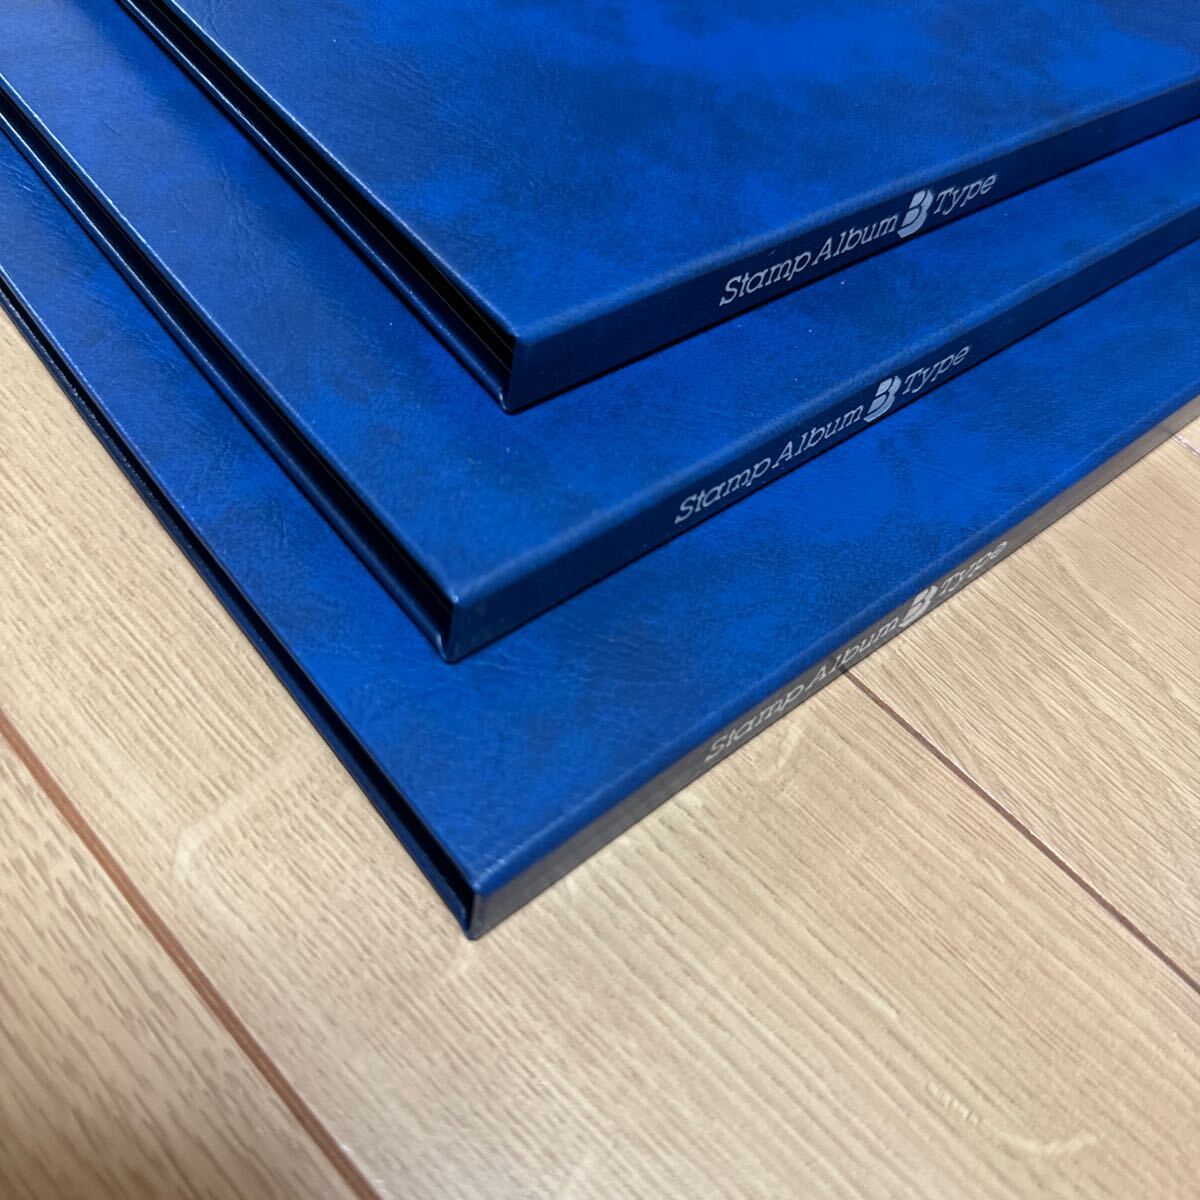  stock book Stamp Album BTypete-ji-SB-30N stamp album blue 3 pcs. summarize case attaching length some 27cm width some 20.3cm cardboard 8 sheets 16 page 6 step 